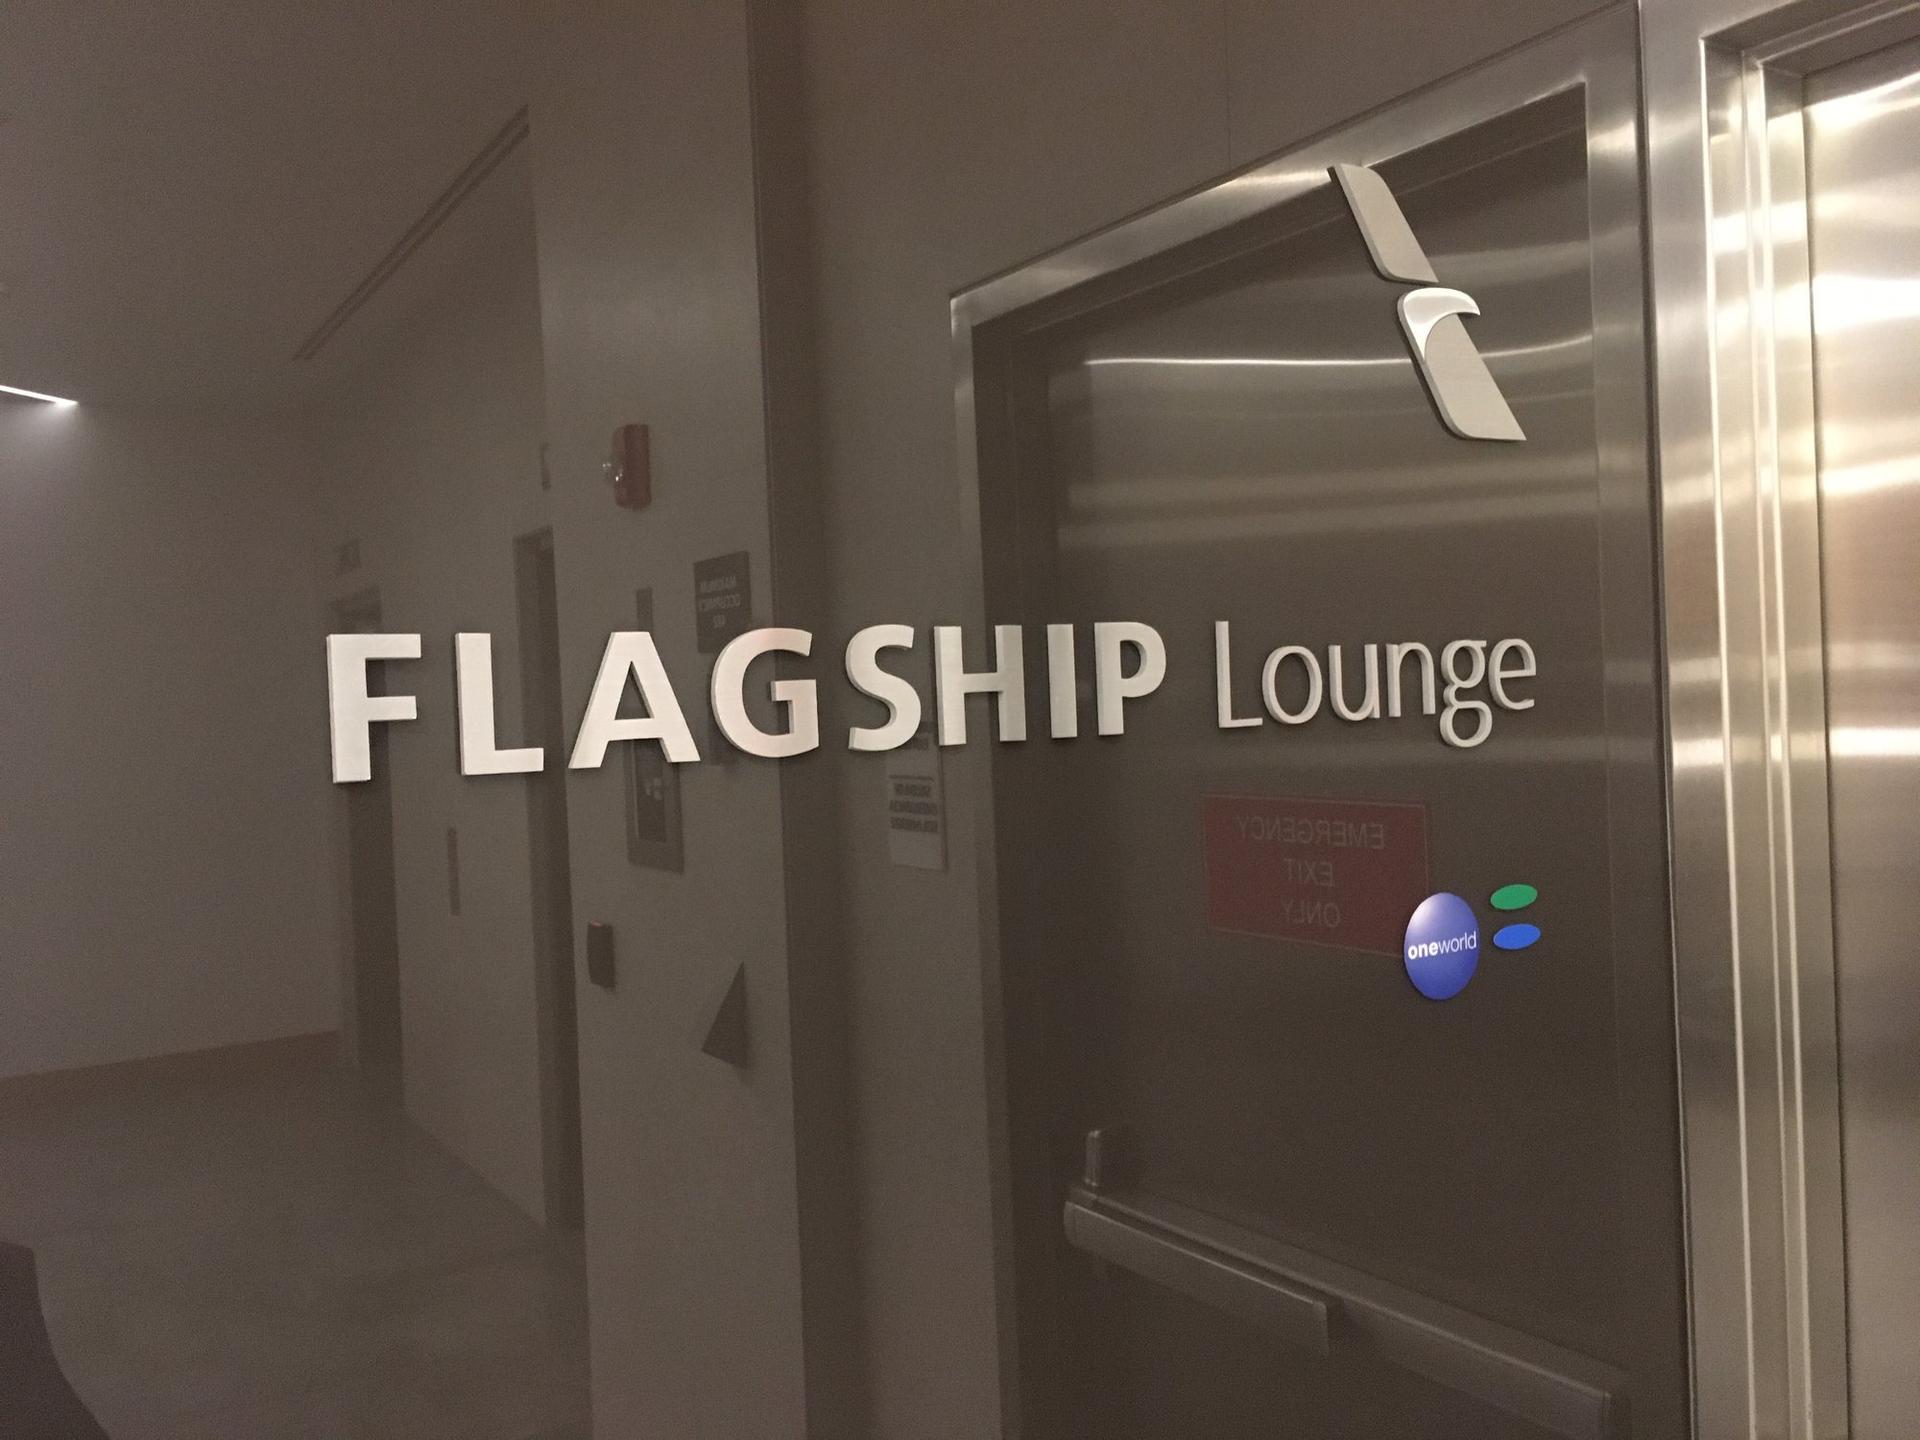 American Airlines Flagship Lounge image 33 of 65